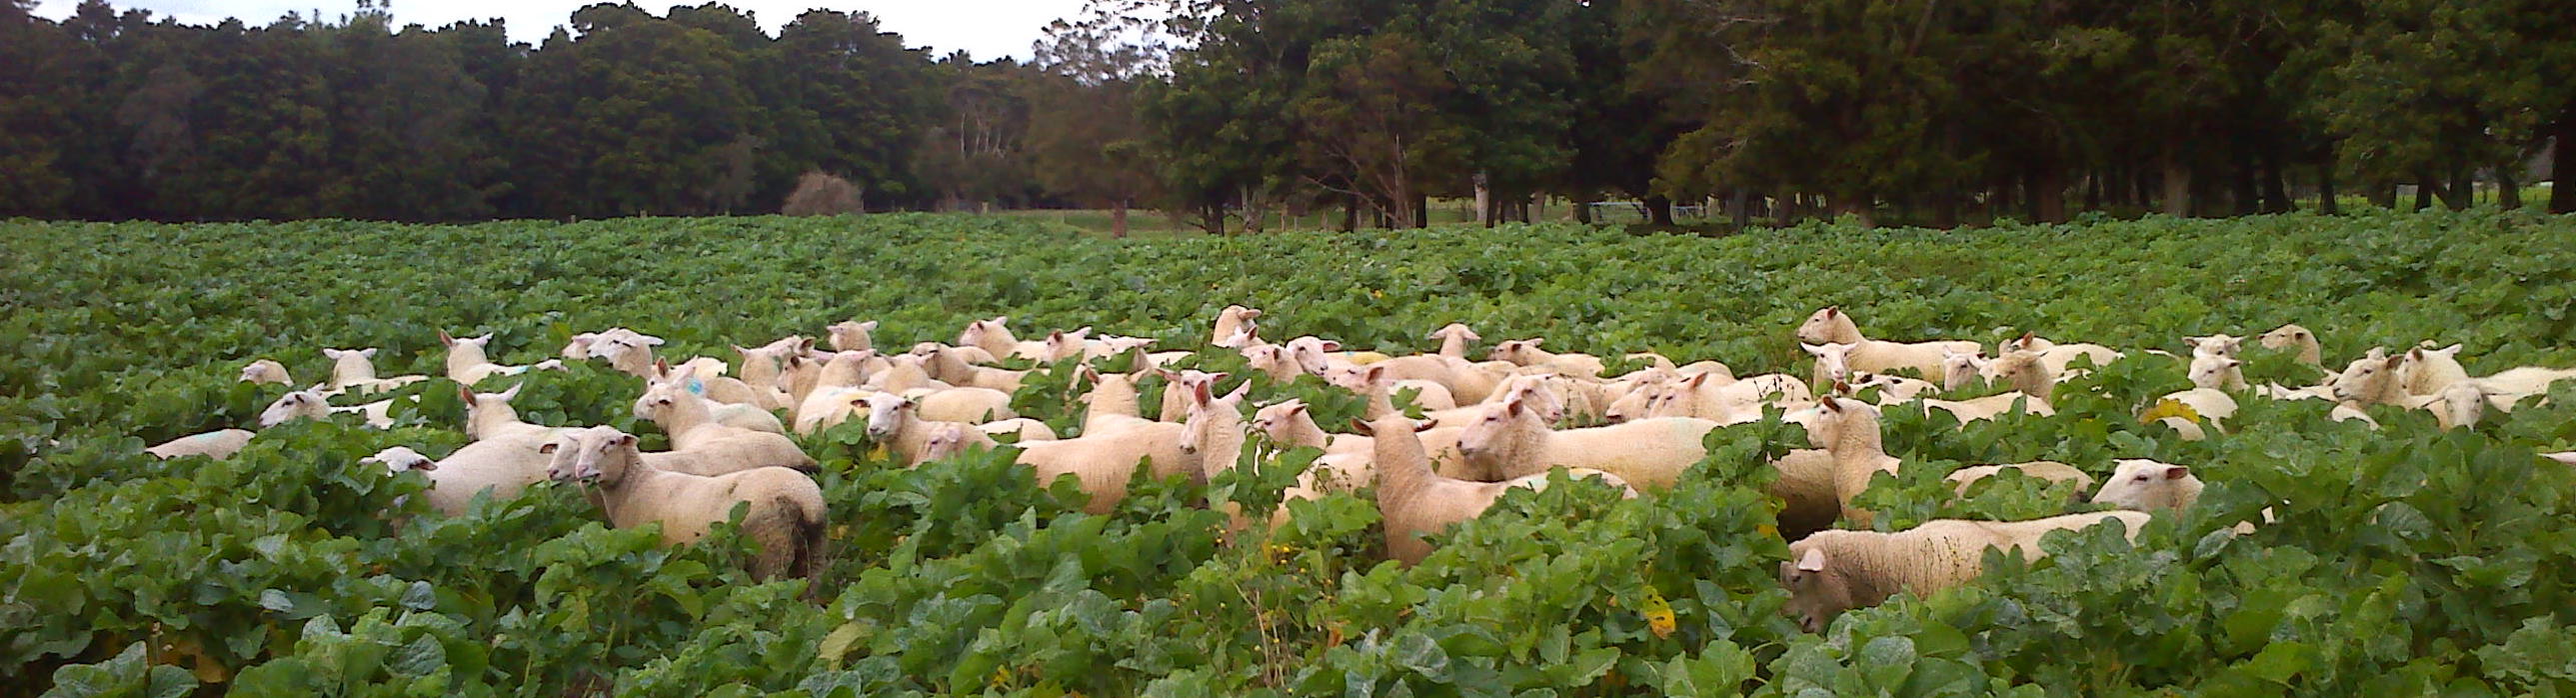 sheep dairy hoggets on crop